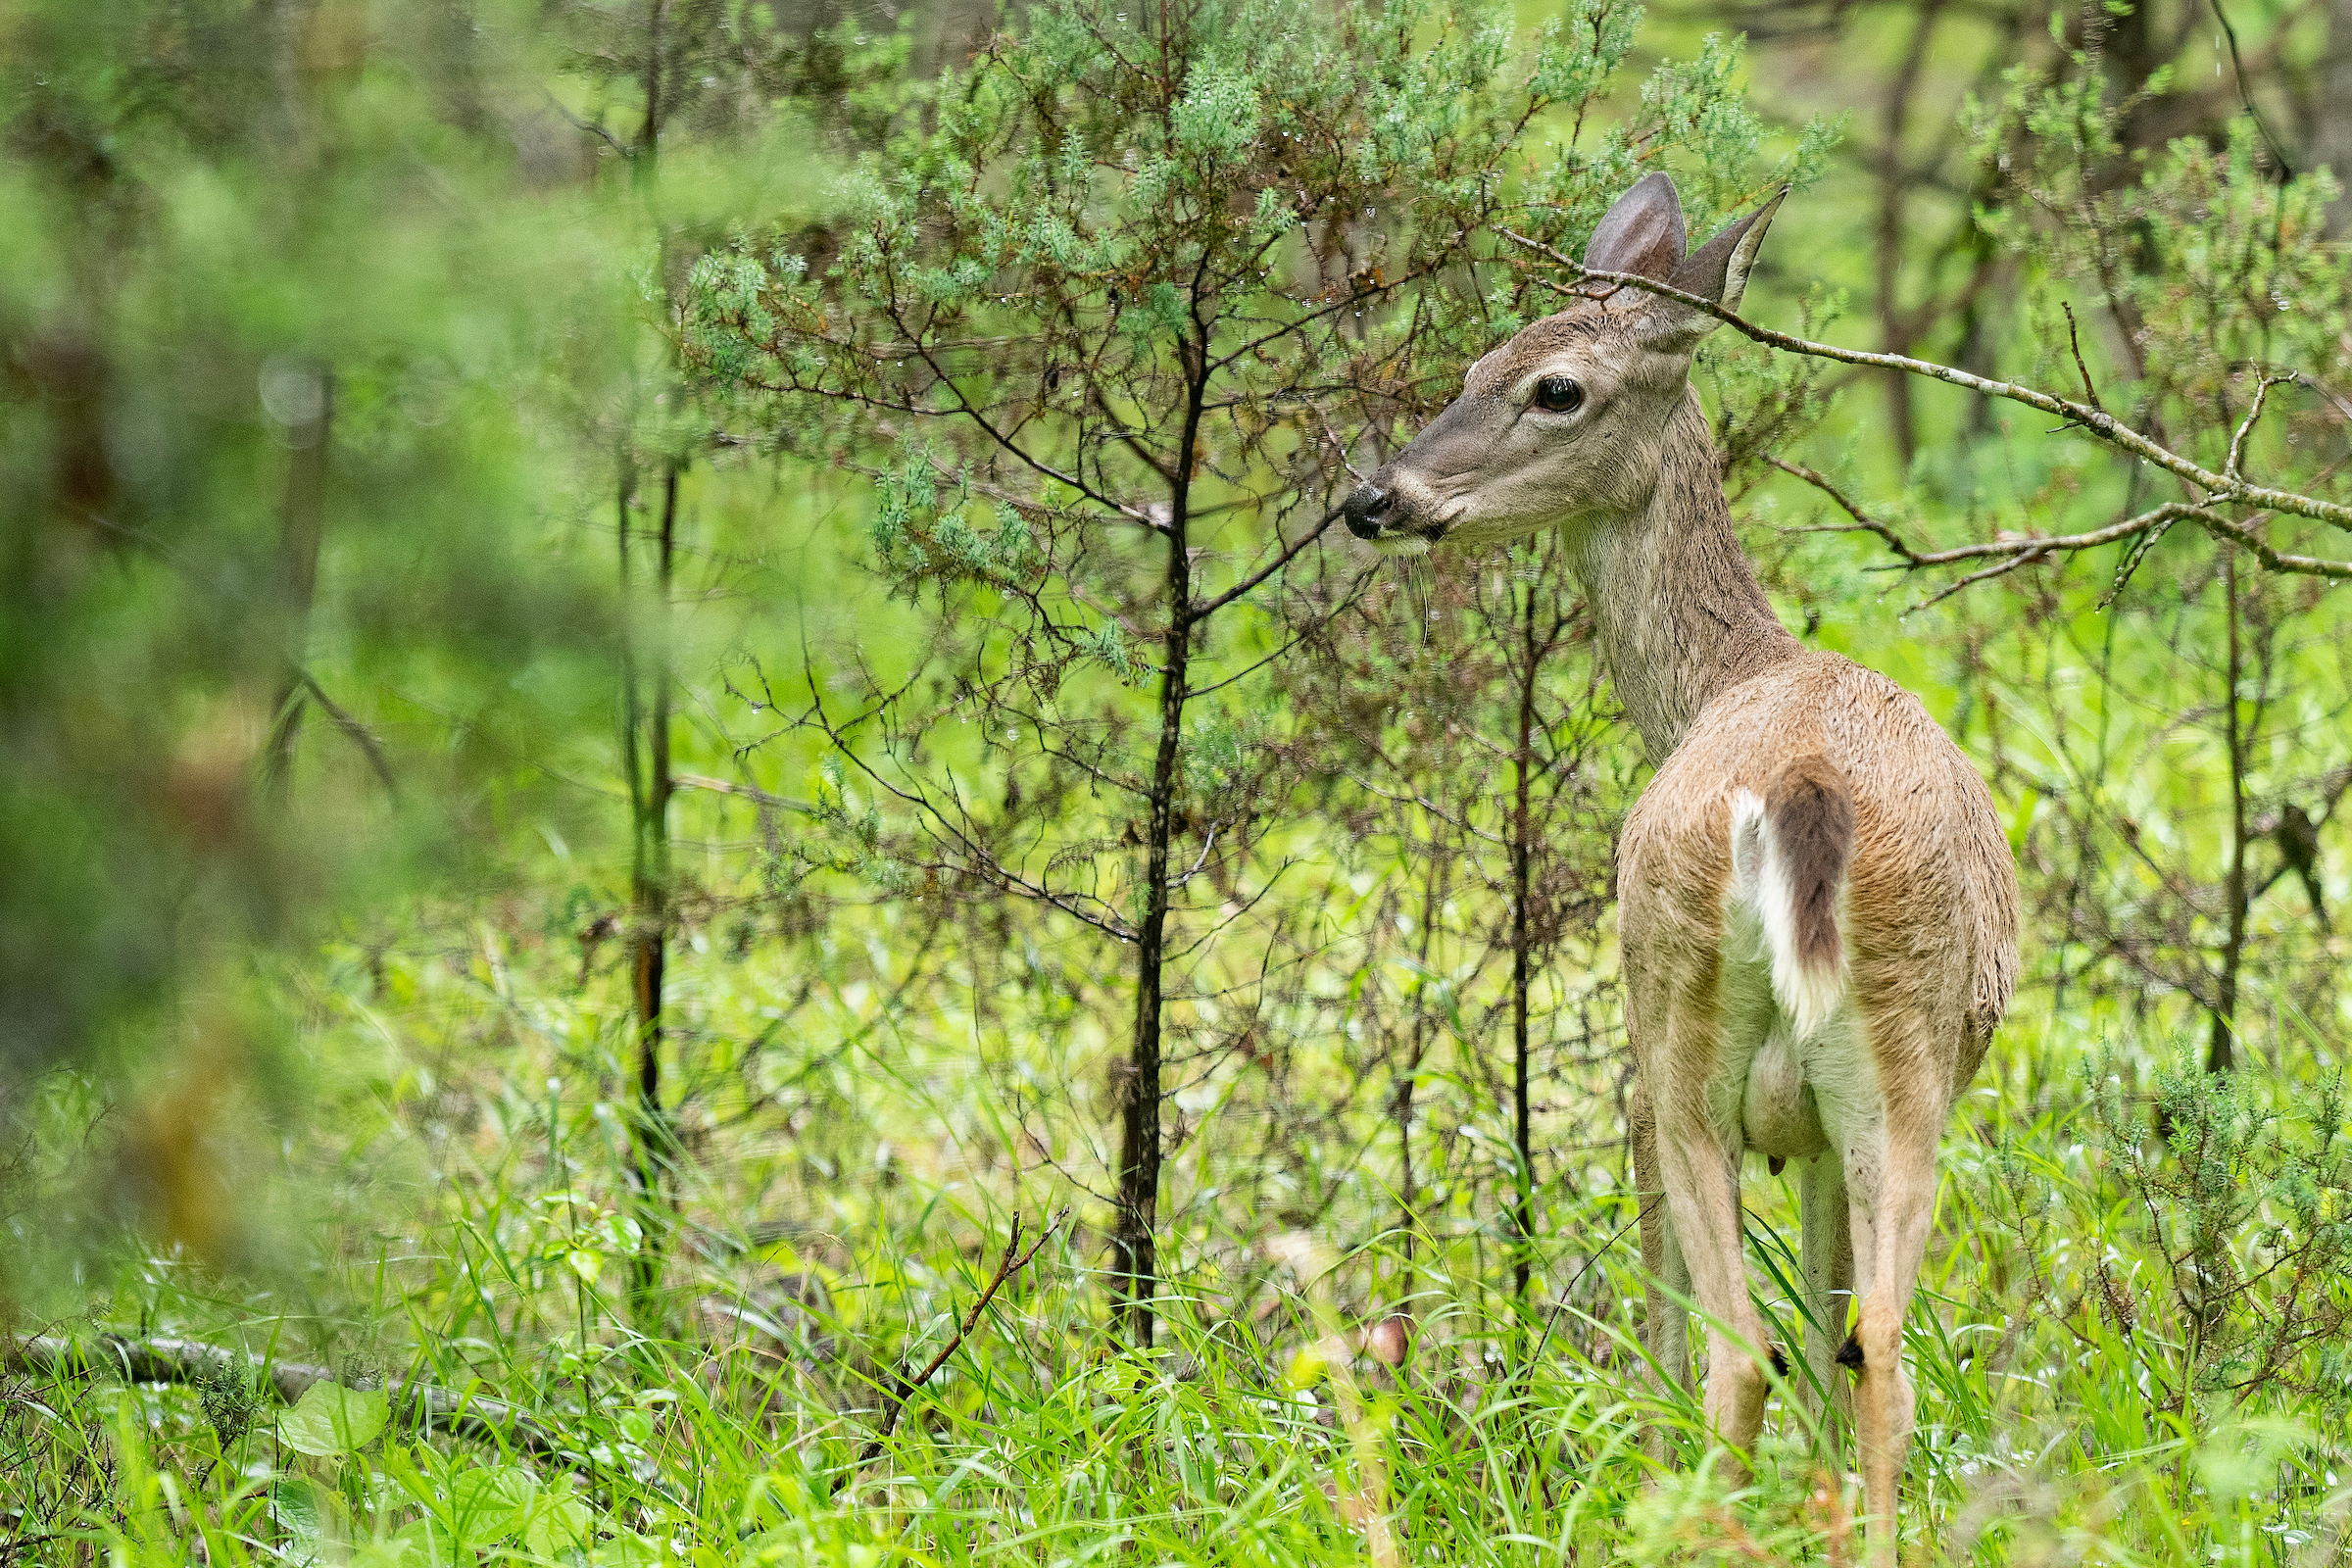 Texas A&M veterinary lab wraps up chronic wasting disease surge testing